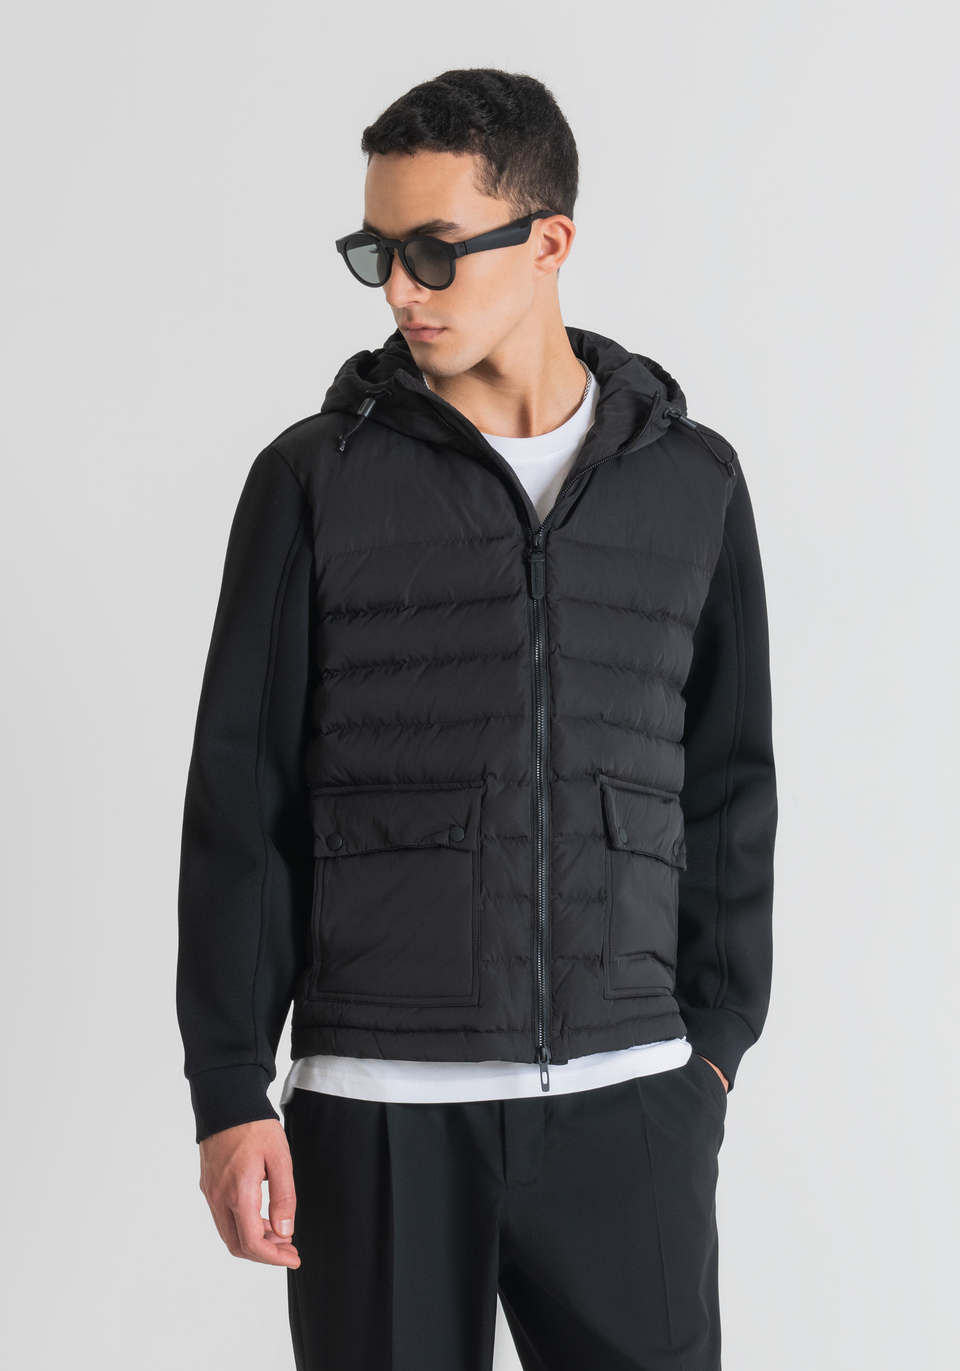 SLIM FIT JACKET IN QUILTED TECHNICAL FABRIC - Antony Morato Online Shop